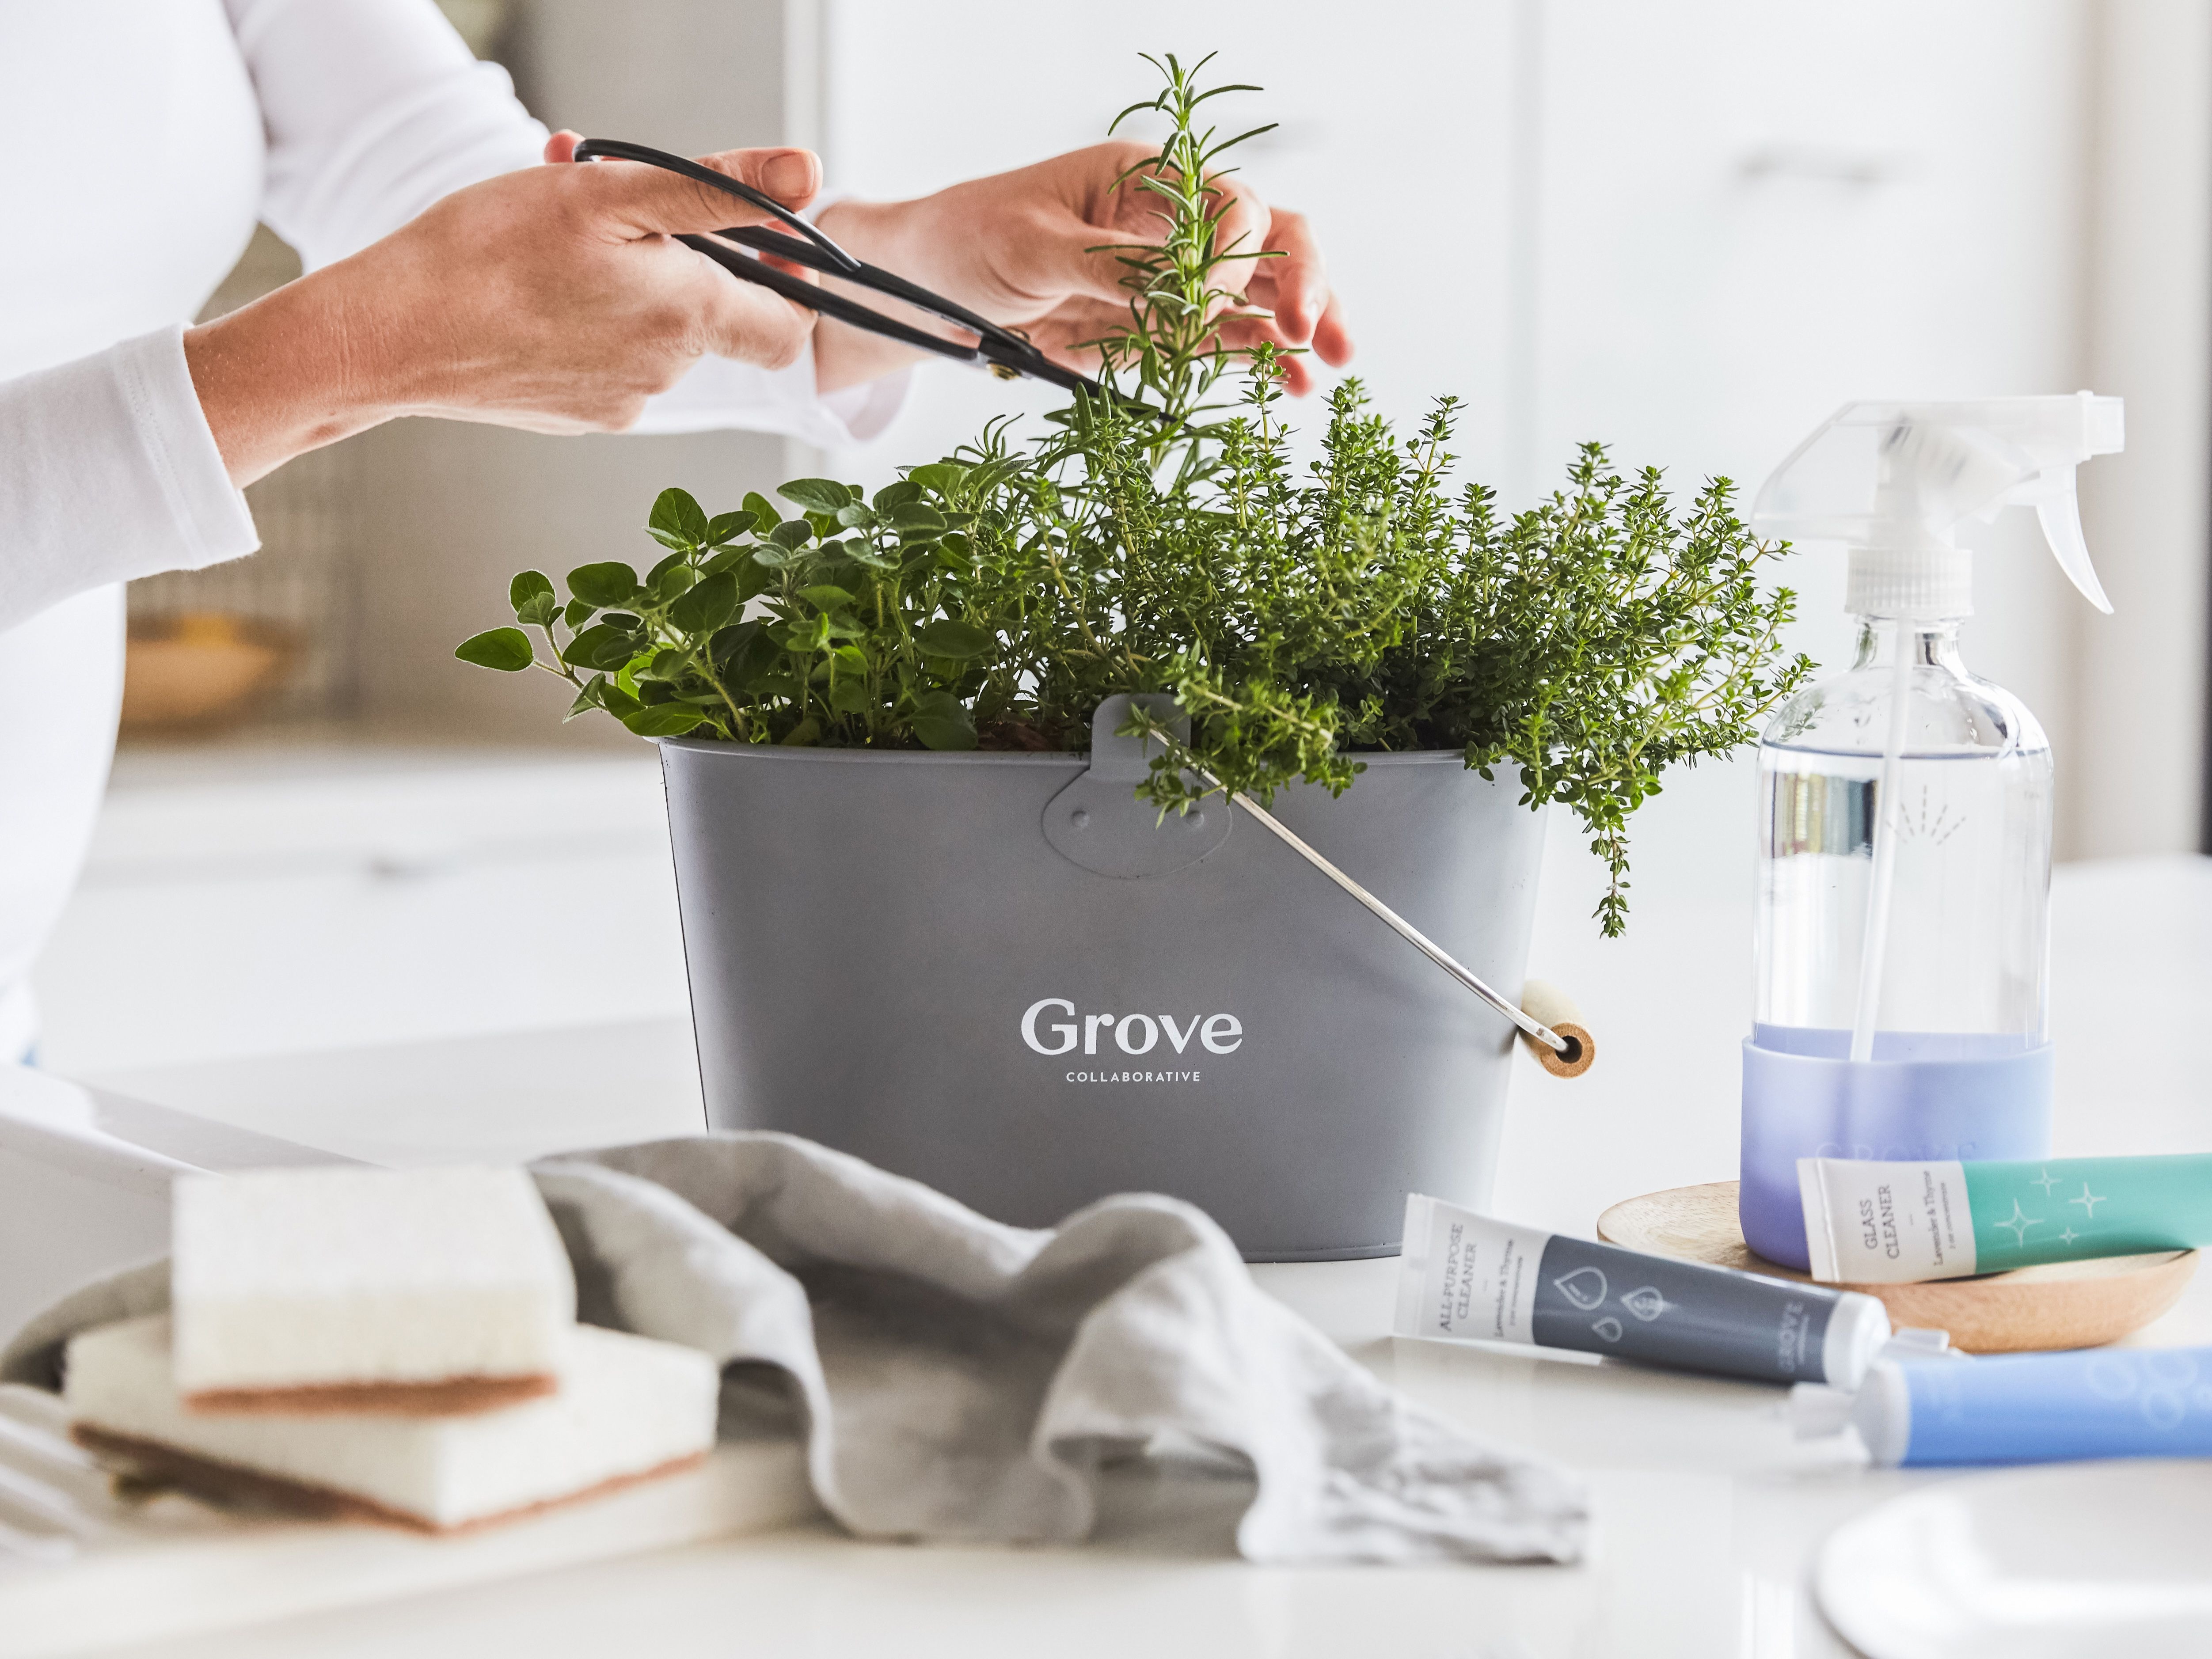 Image of a Grove Co. Cleaning Caddy on a counter with a garden growing inside and someone trimming the plants